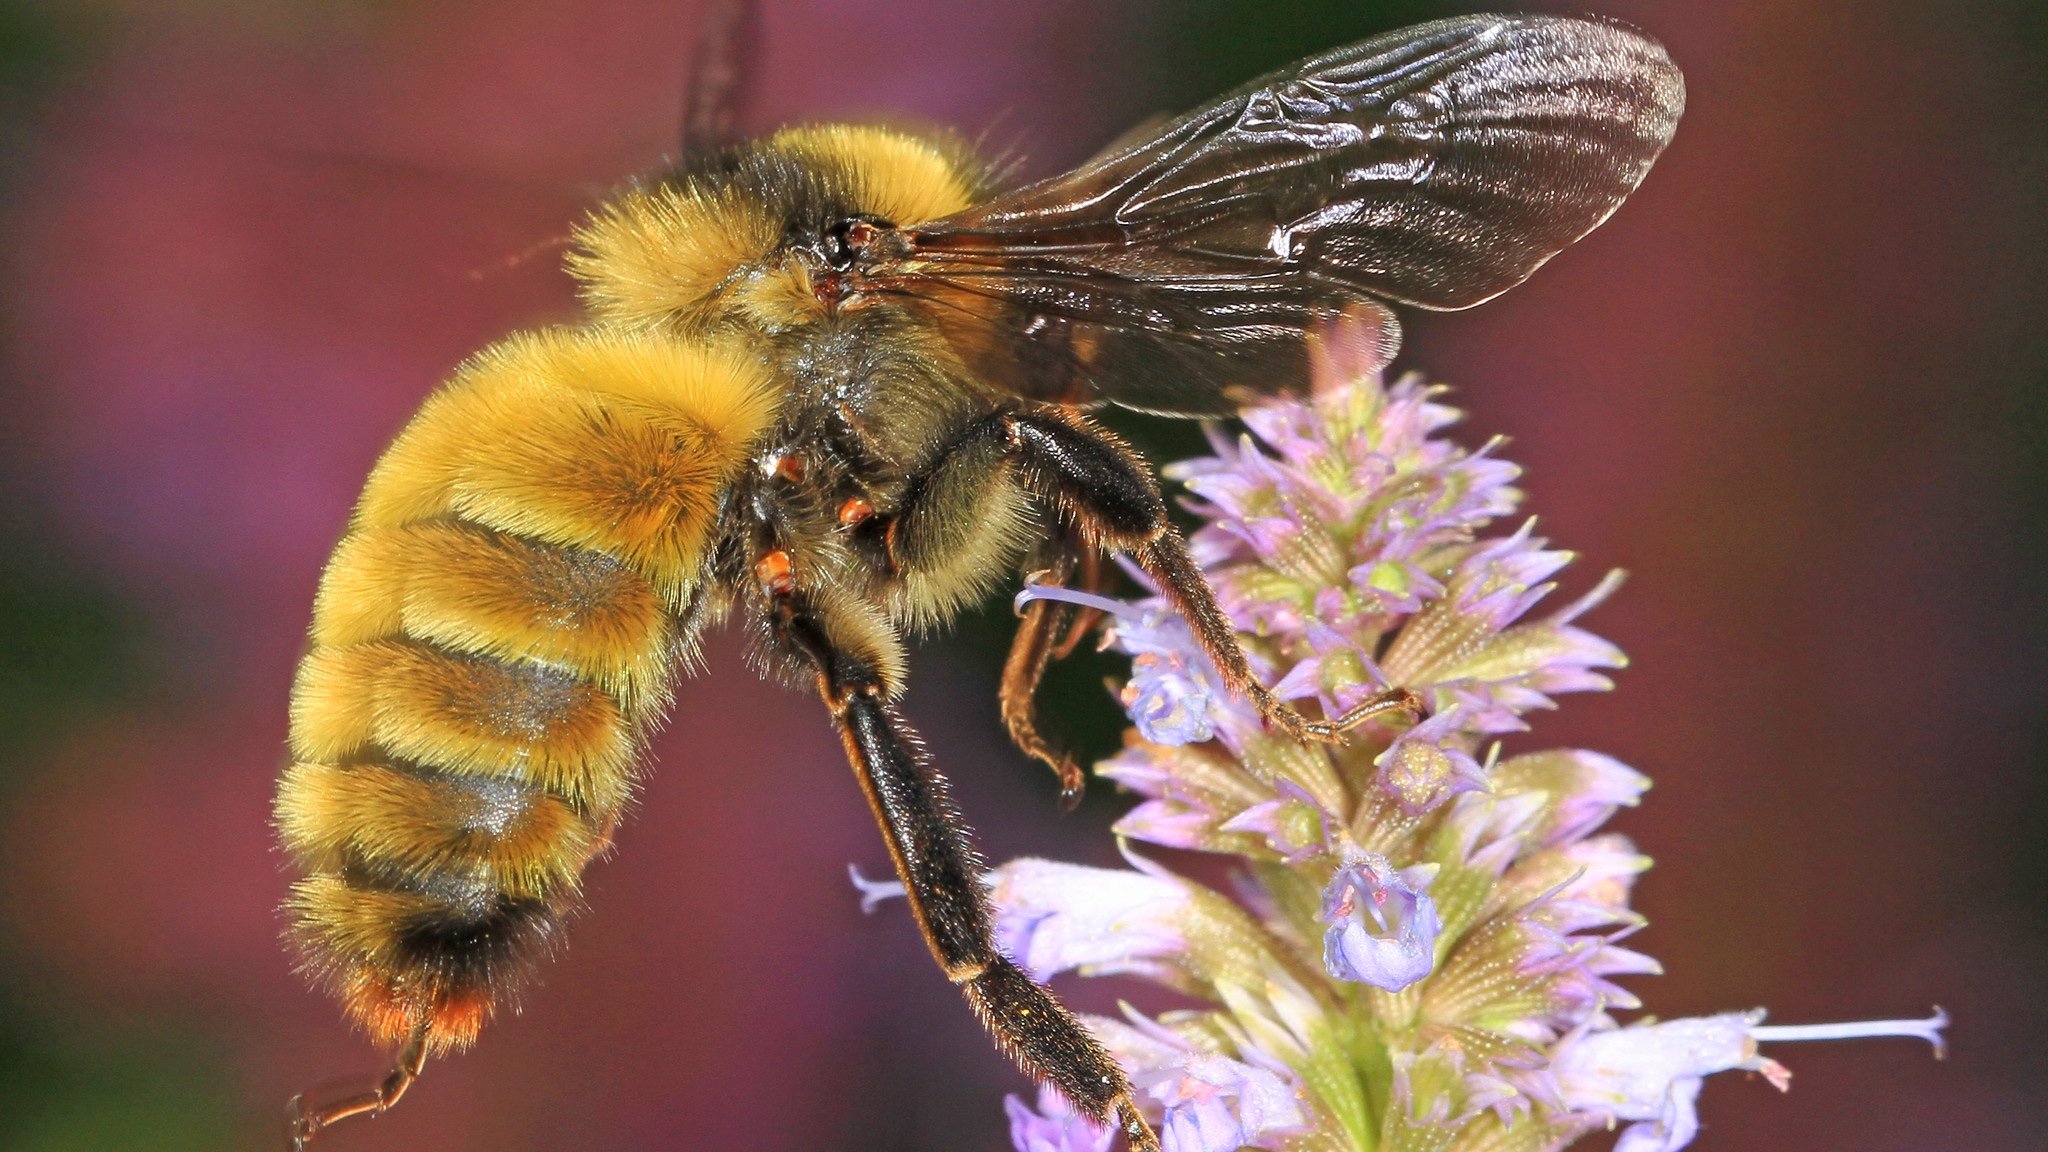 The bumble bee is one of hundreds of species of bees native to Illinois. (Judy Gallagher / Flickr)